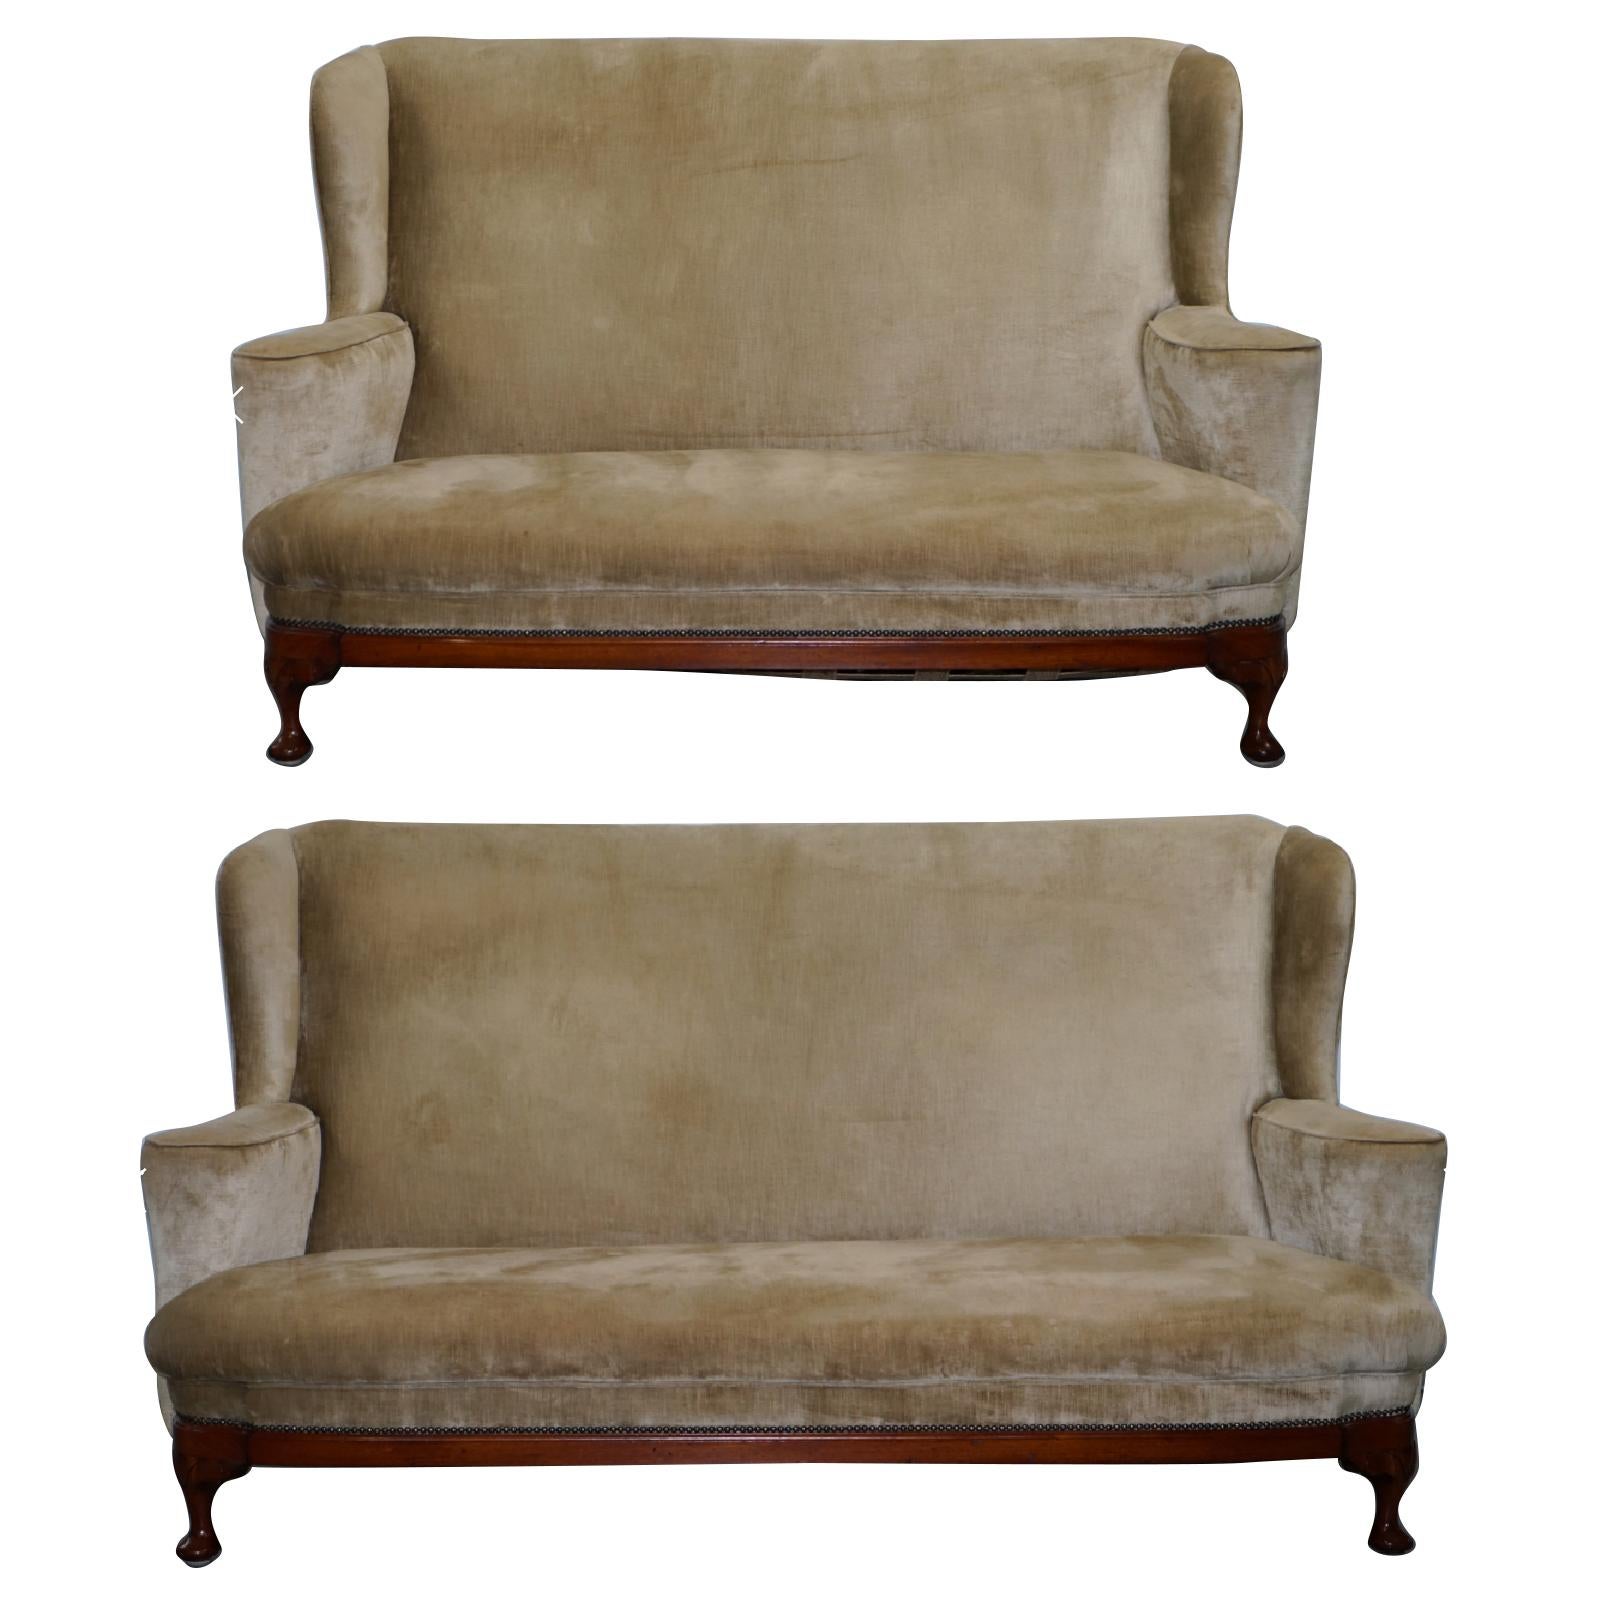 Matching Pair of George I Style Settees Victorian Made Walnut Mahogany Frame